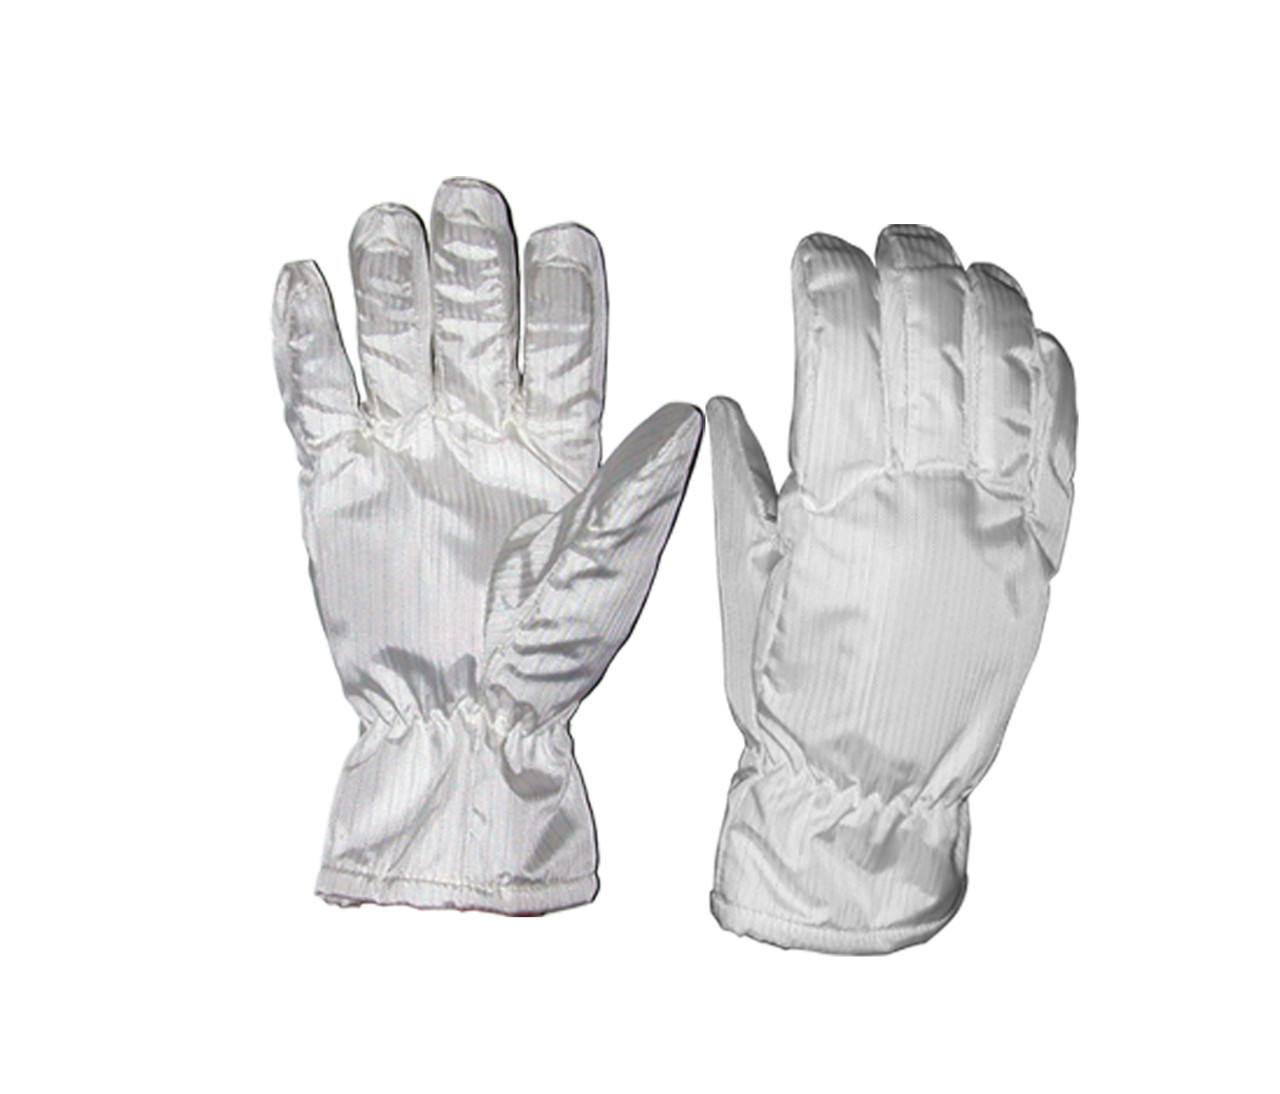 Heat Resistant Nomex® and Kevlar® Gloves Rated up to 500°F